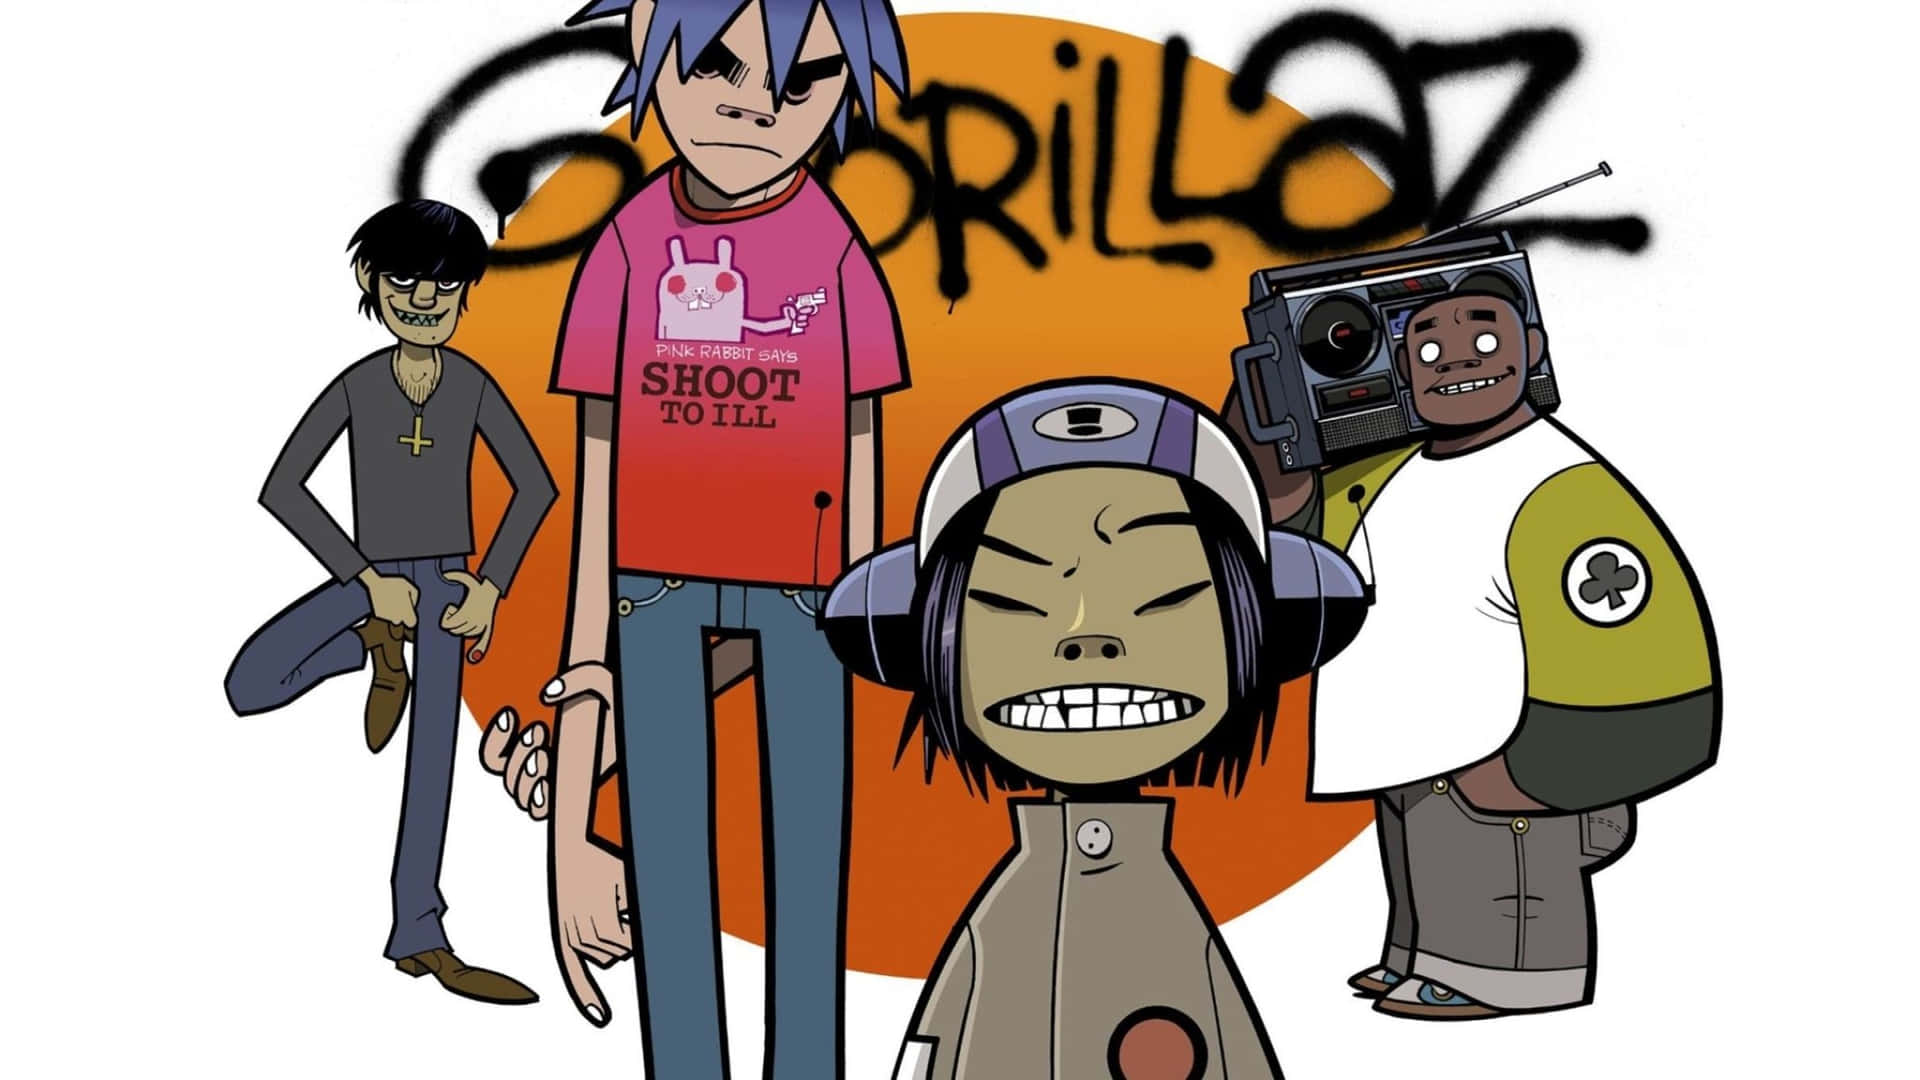 Jamming to a fresh beat from one of the world's favorite alternative music bands Gorillaz Wallpaper